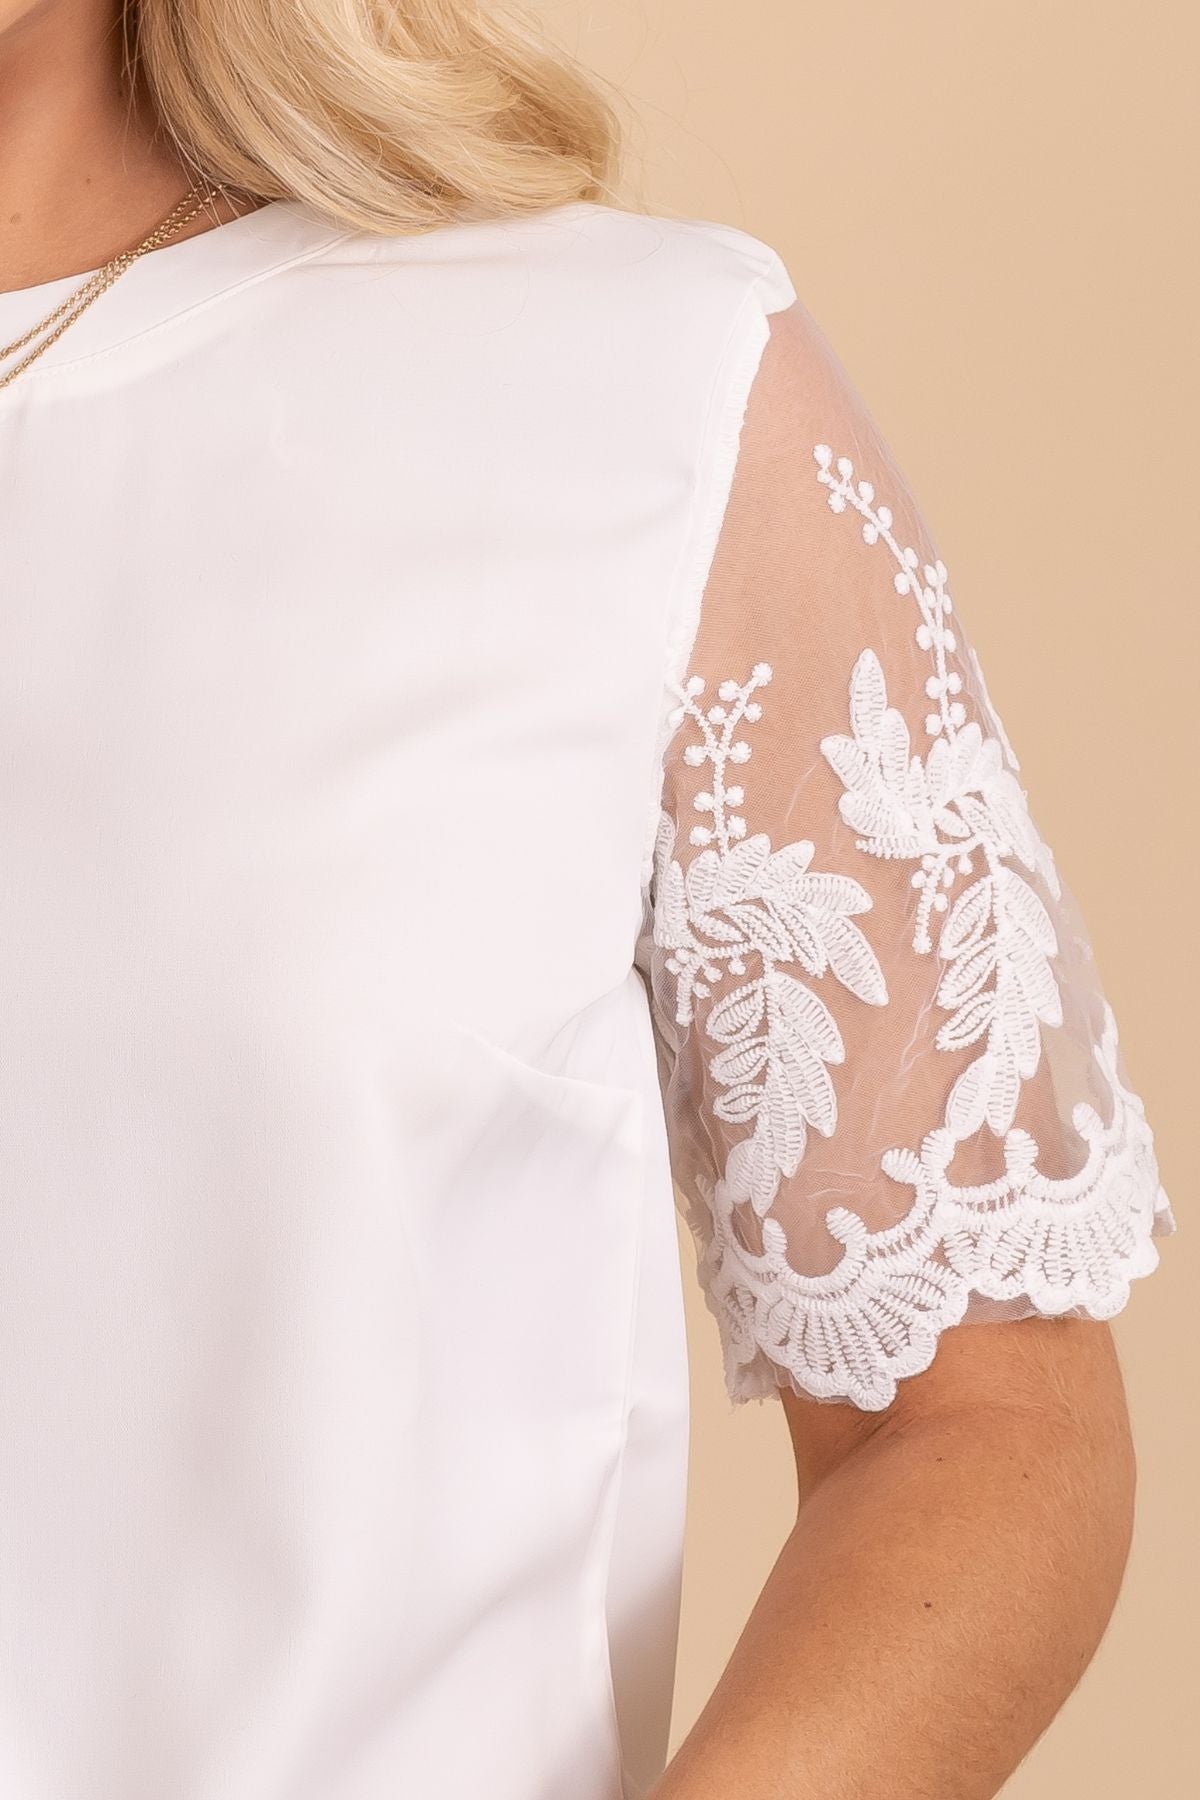 Lisa Marie White Embroidered Top